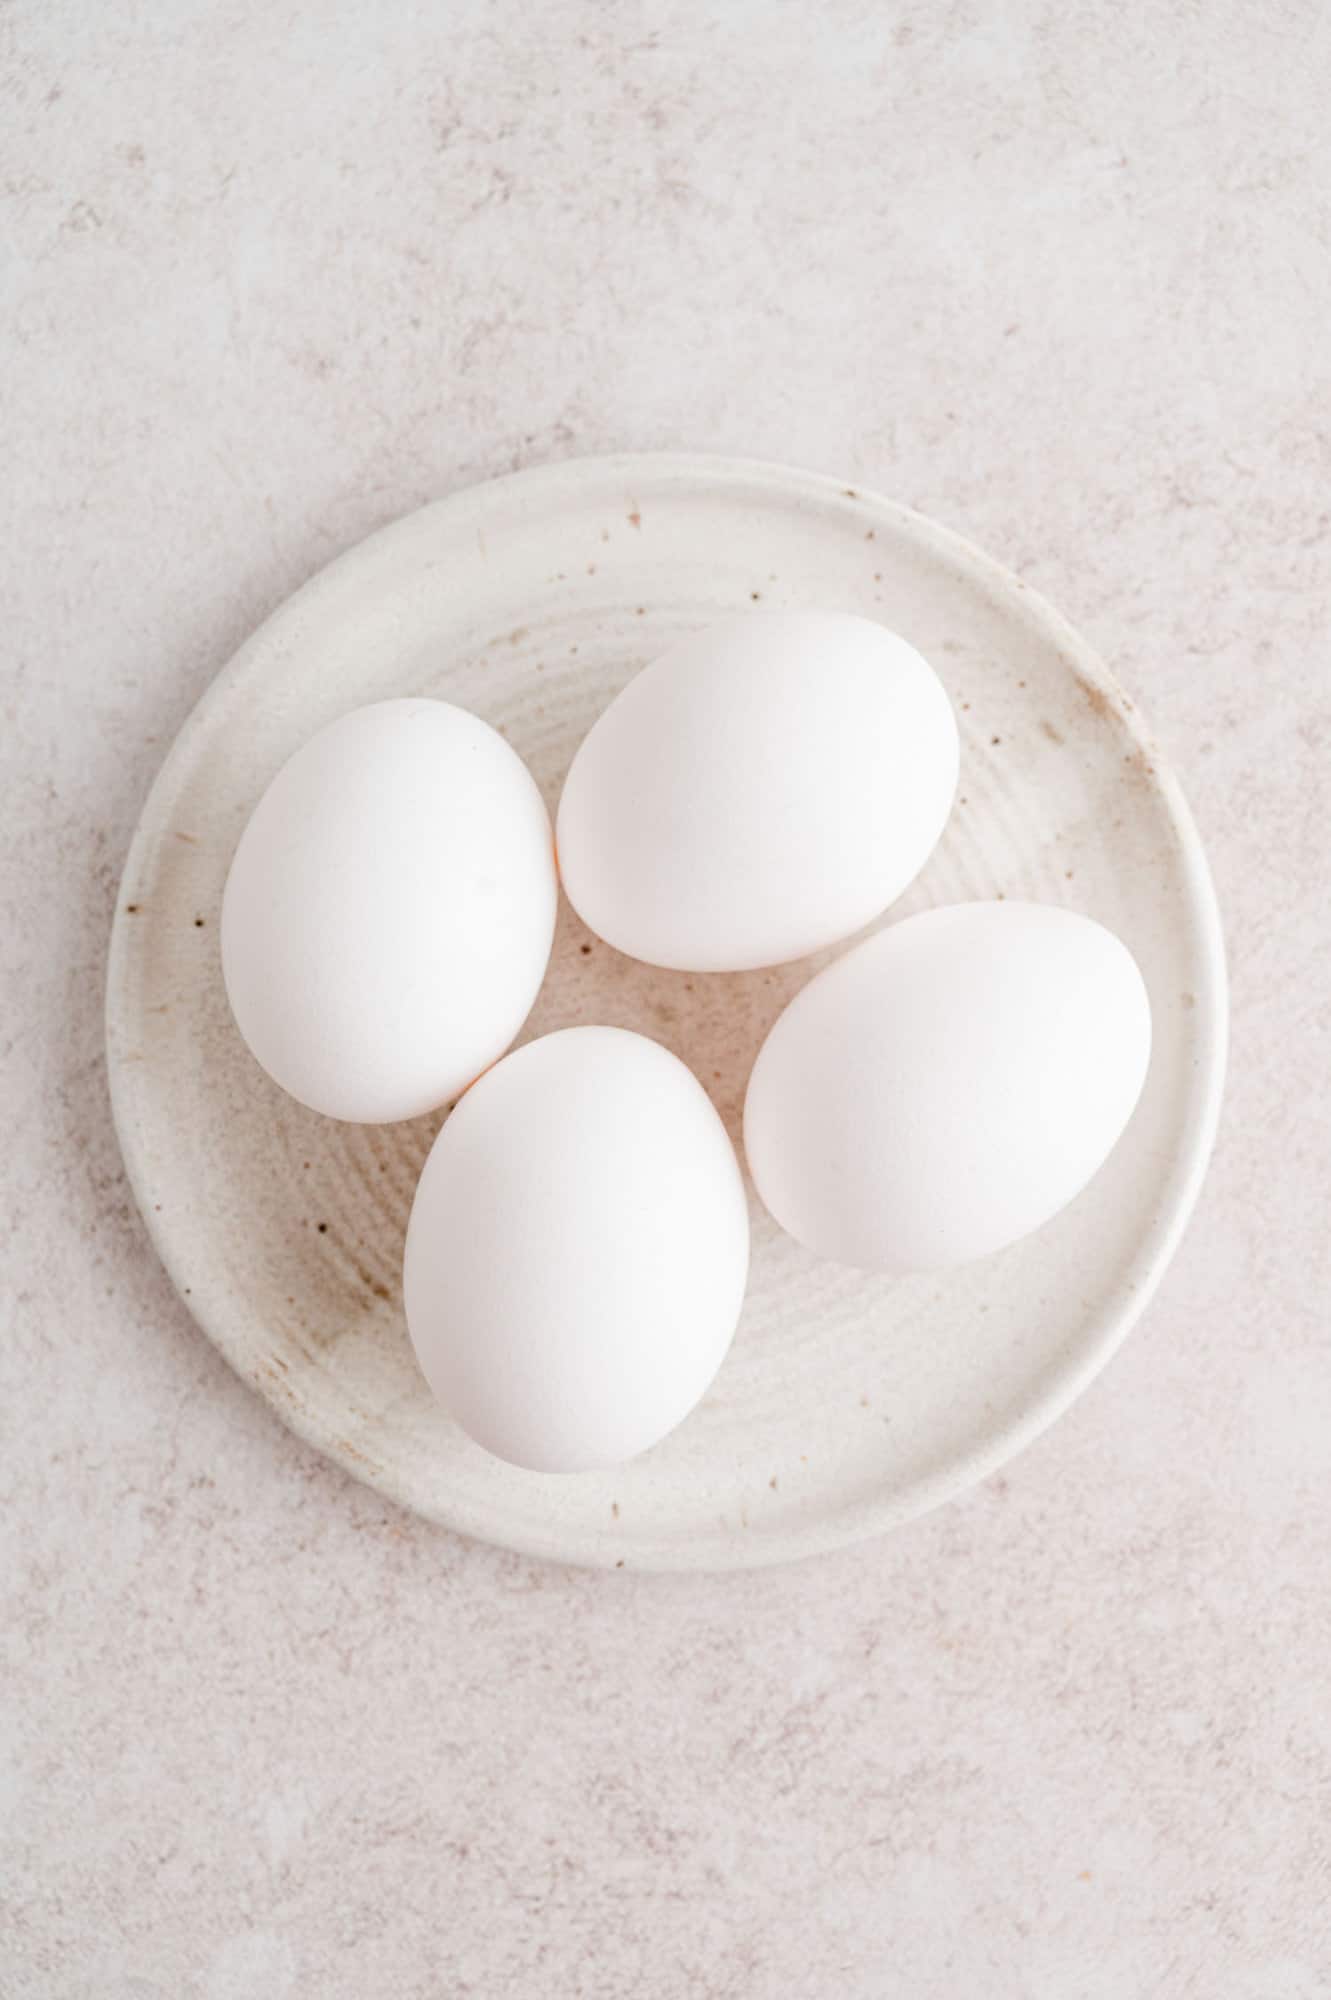 Overhead view of four eggs on a white plate.